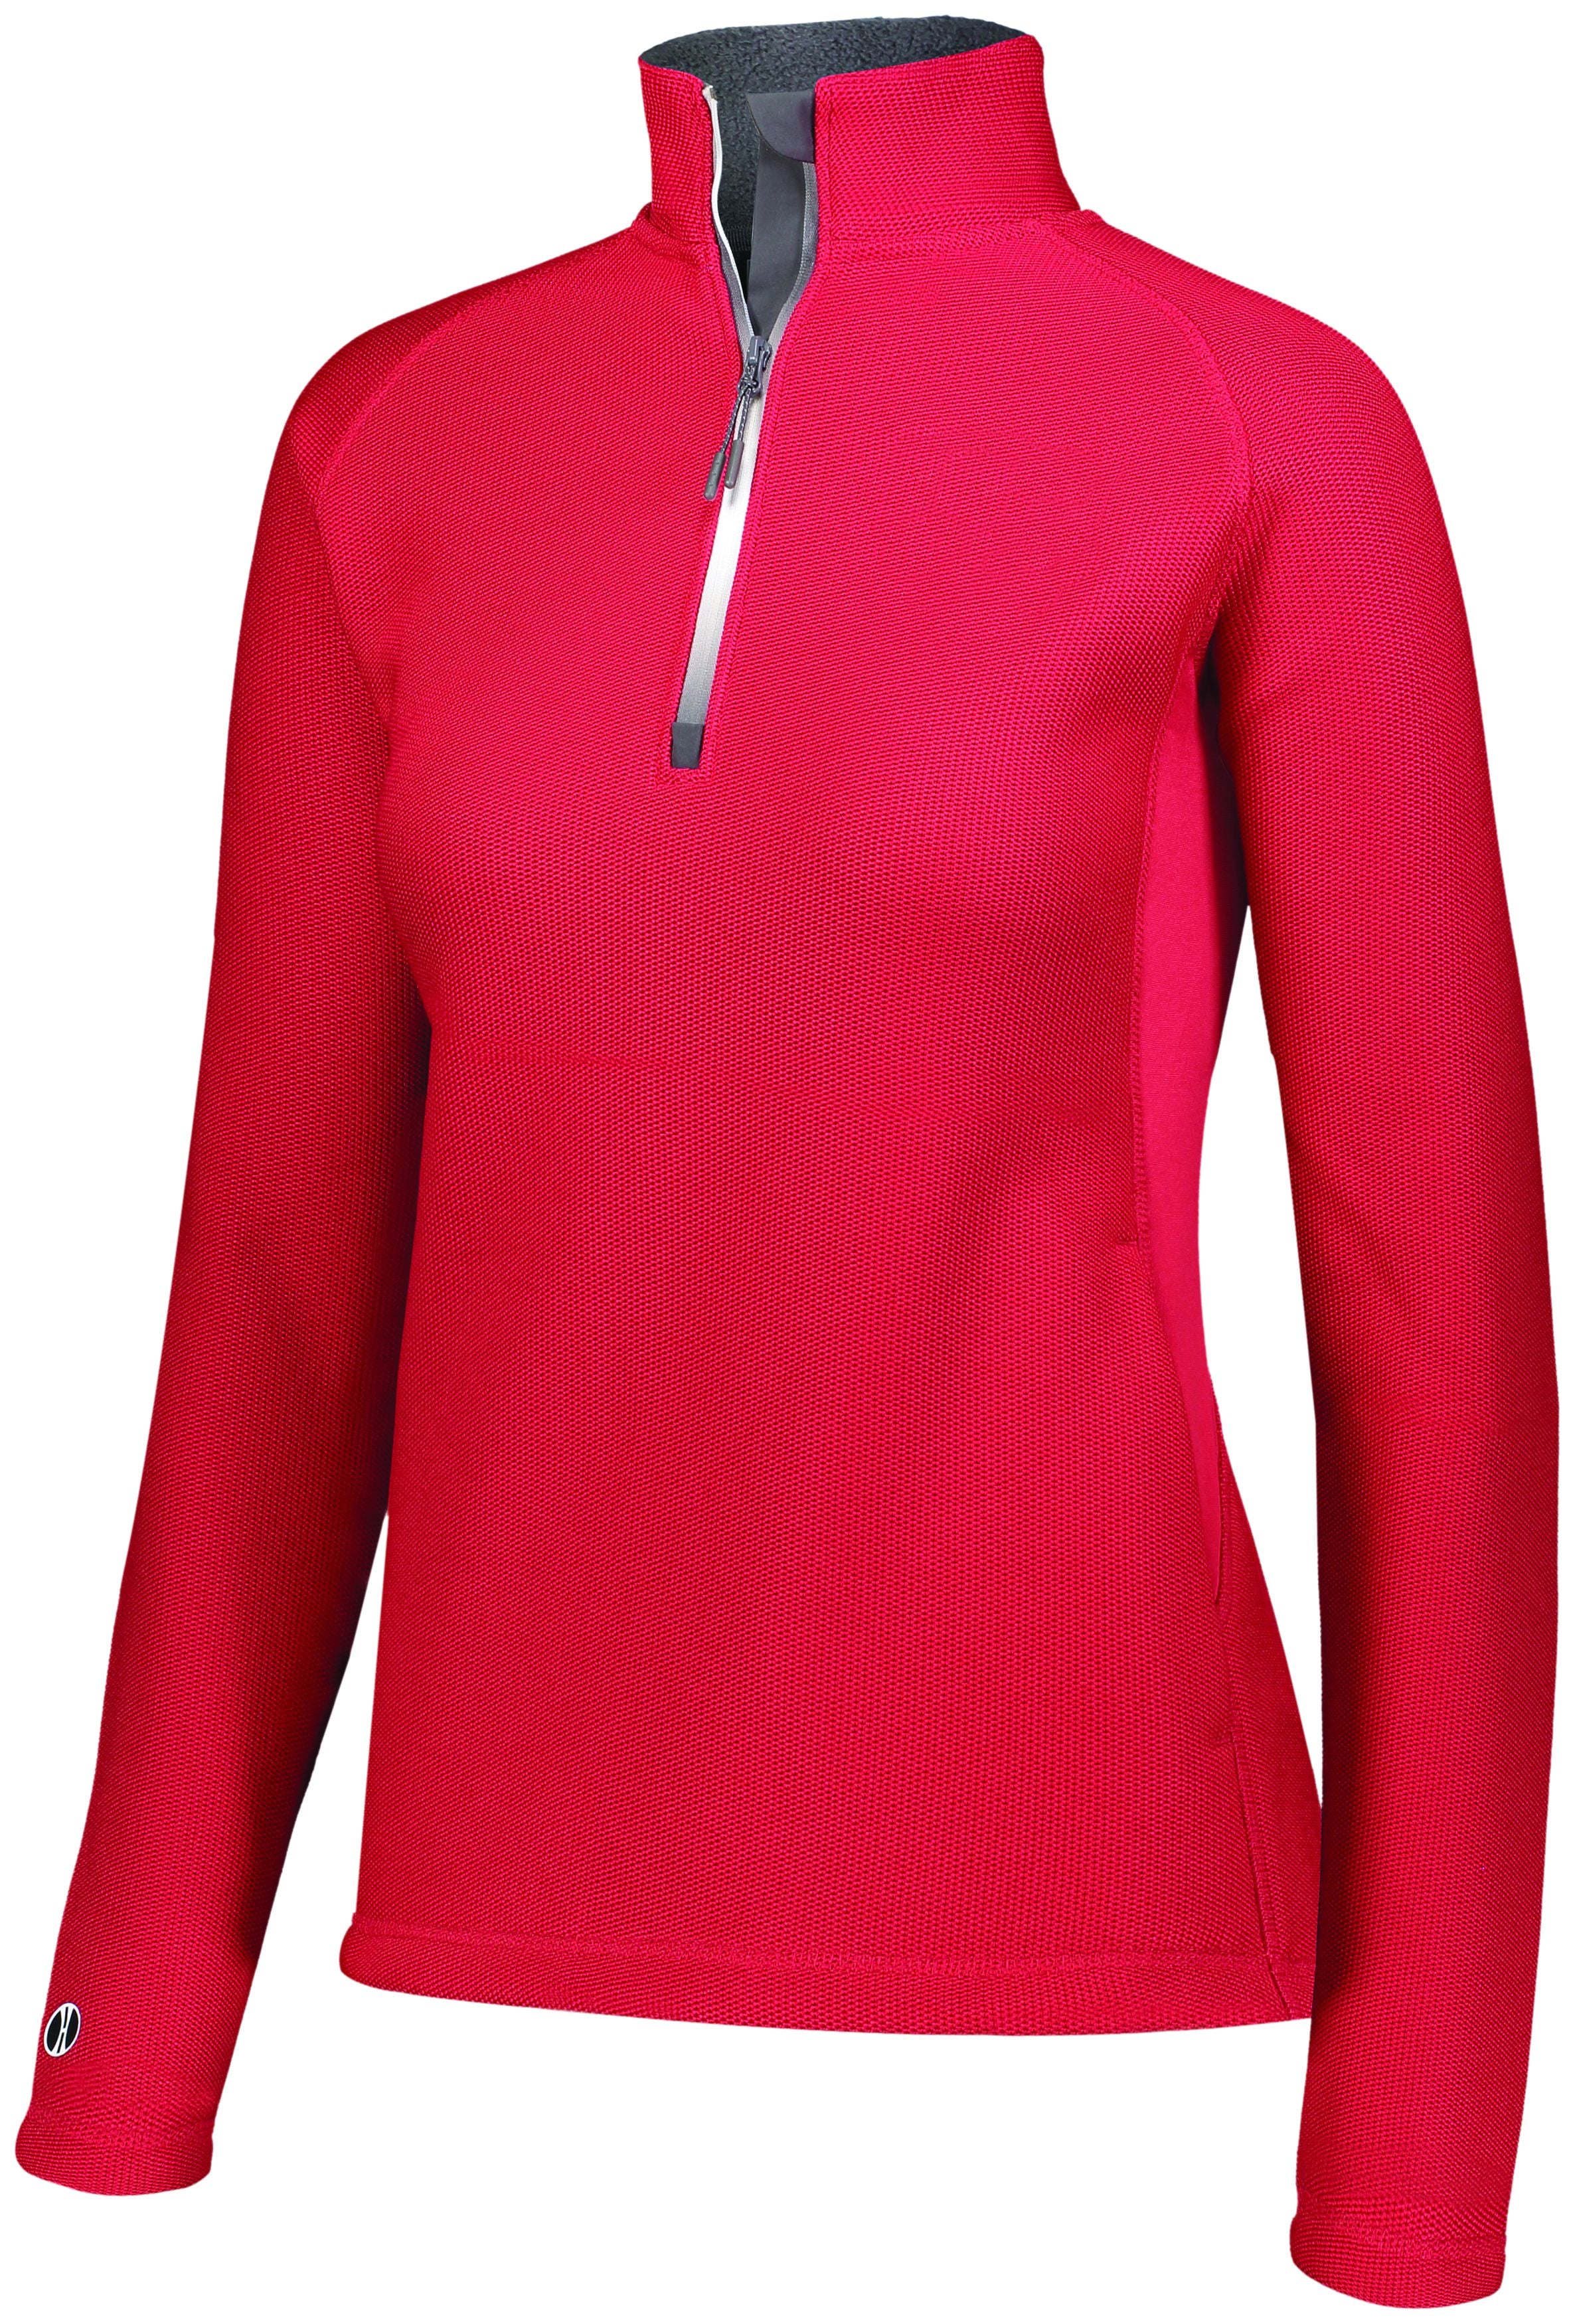 Holloway Ladies Invert 1/2 Zip Pullover in Scarlet  -Part of the Ladies, Ladies-Pullover, Holloway, Outerwear, Invert-Collection product lines at KanaleyCreations.com